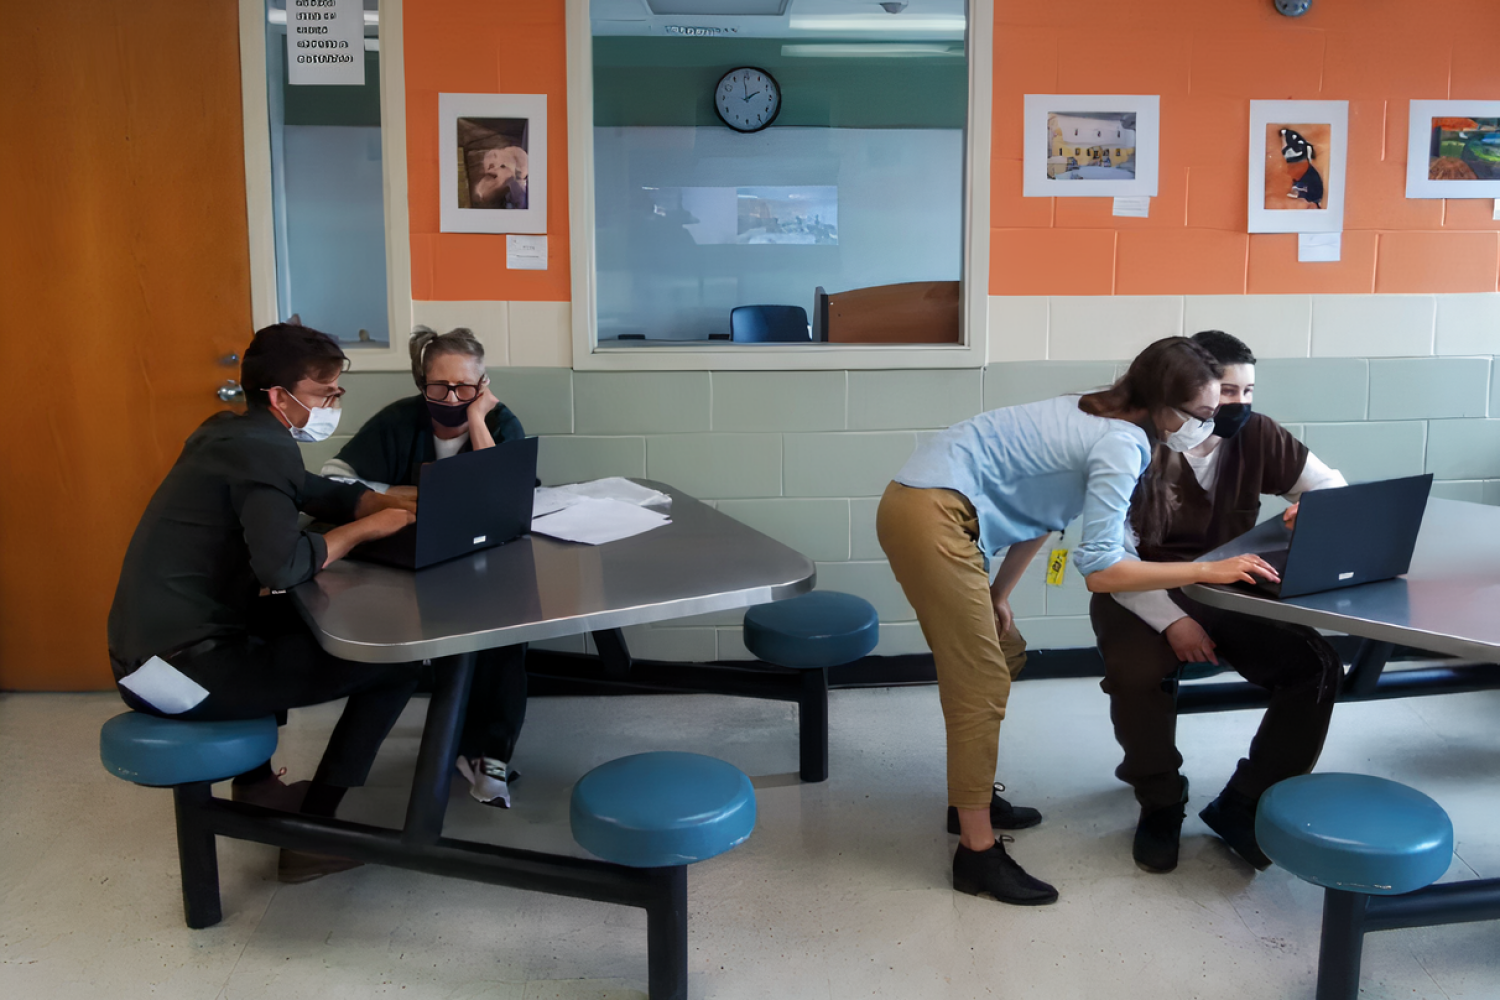 MIT graduate students Marisa Gaetz (second from right, standing) and Martin Nisser (left) assist students in a coding class at a local correctional facility.